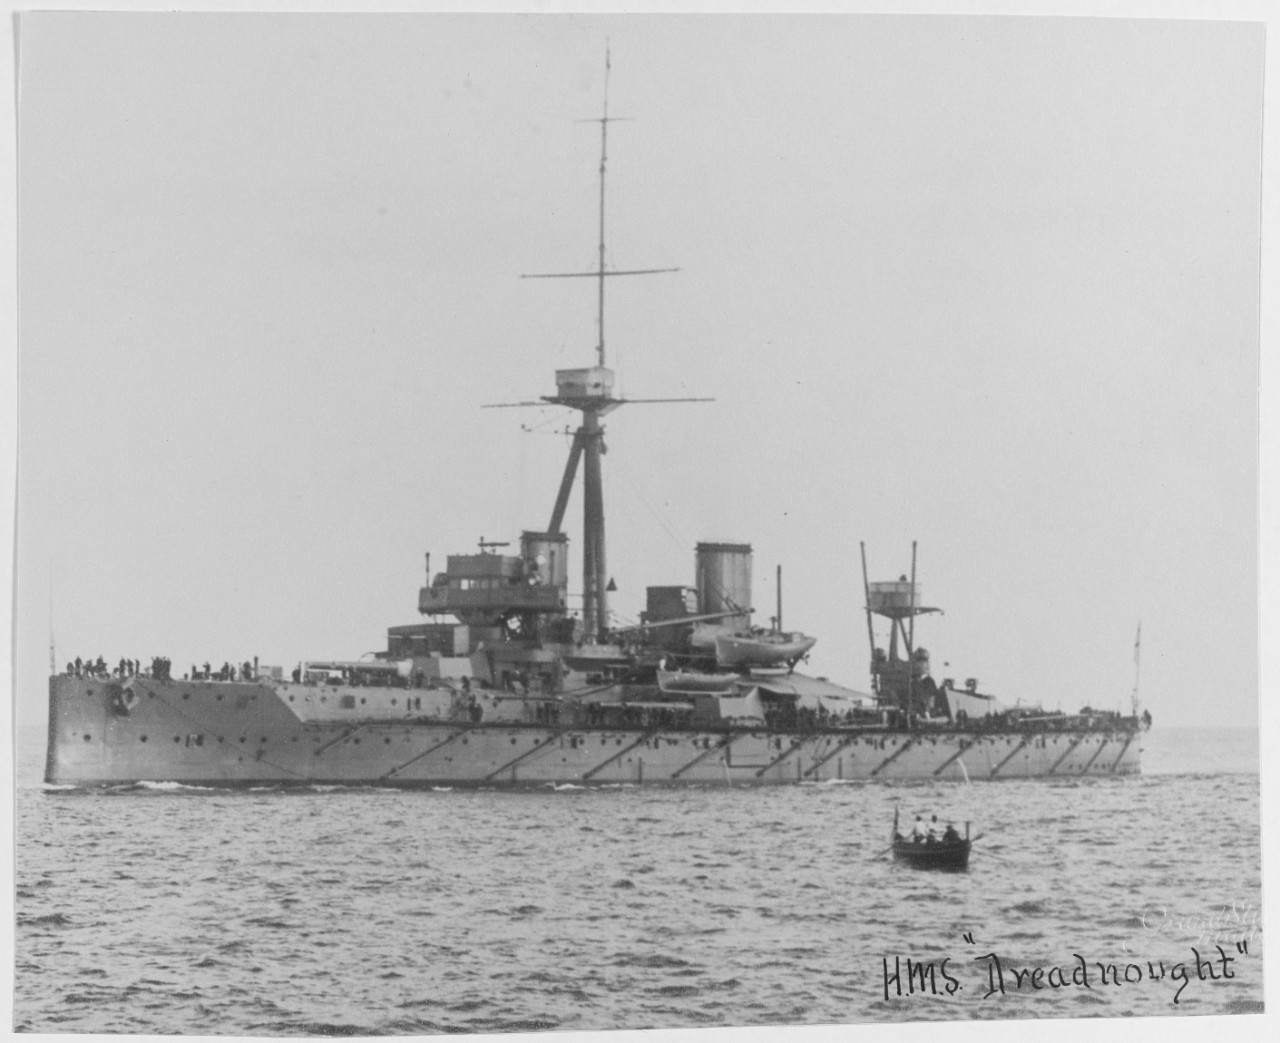 NH 61007 HMS Dreadnought For a MEDIUM RESOLUTION IMAGE, click the ...